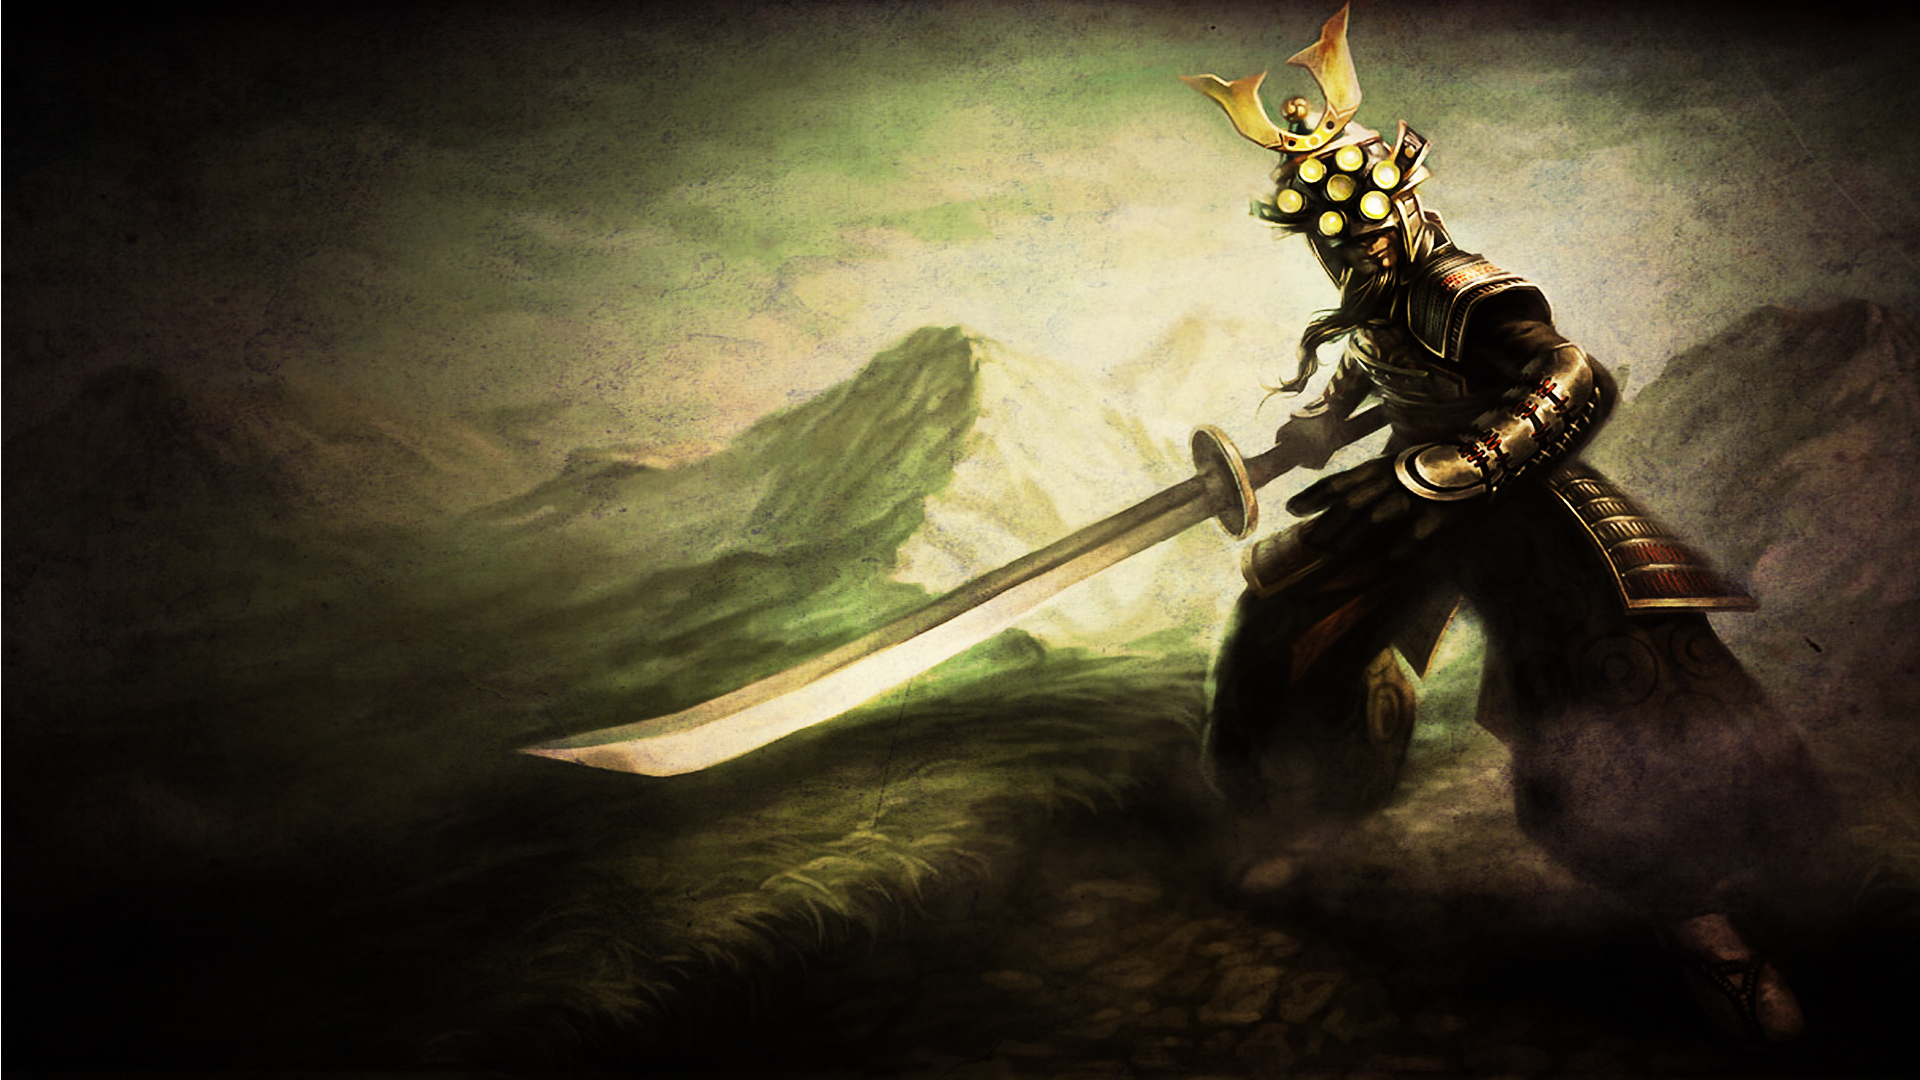 Master Yi Wall Paper Wallpapers